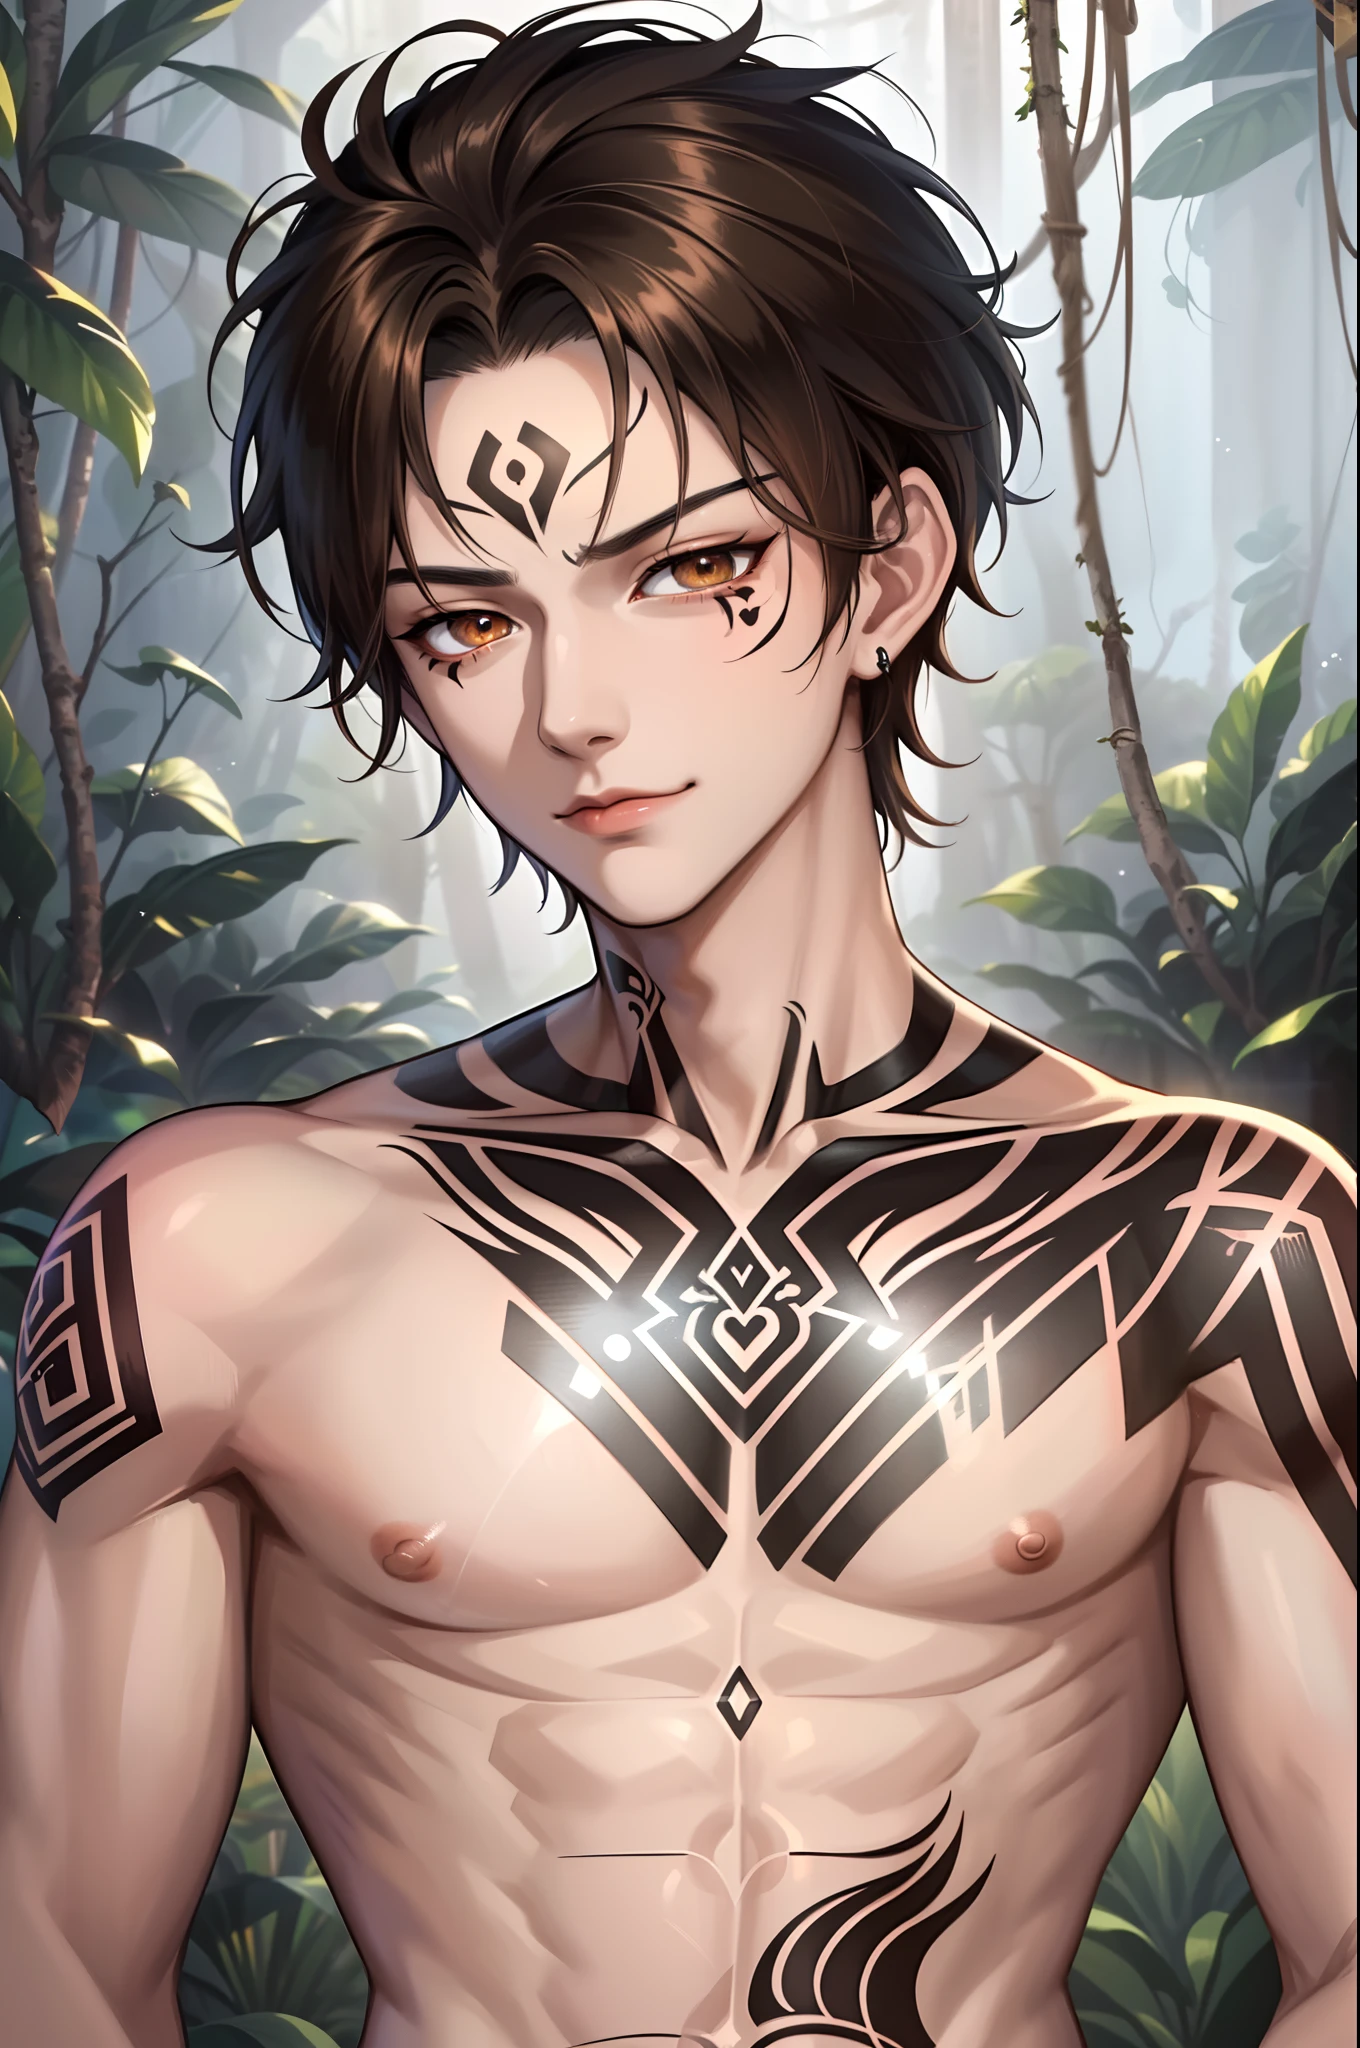 Masterpiece, best quality, high quality, close up, solo anime portrait,1boy, handsome male, (Shirtless male with abs and pecs:1.5), (Black Tribe tattoos on his body:1.7), (Jungle scenery:1.6), (dark side swept brown hair:1.4), he is stunning and super handsome, god like appearance, `(gradient_hazel_eyes:1.4), masculine, handsome, sexy, hot, abs, pecs, detailed background, SLE, mksks style, effeminate, JRPG art, trending on caravaggio, intrinsicated and detailed smug, looking at camera, face focus, highly-detailed, top lightning, trending on pixiv, HD digital, 32k, vibrant colors,